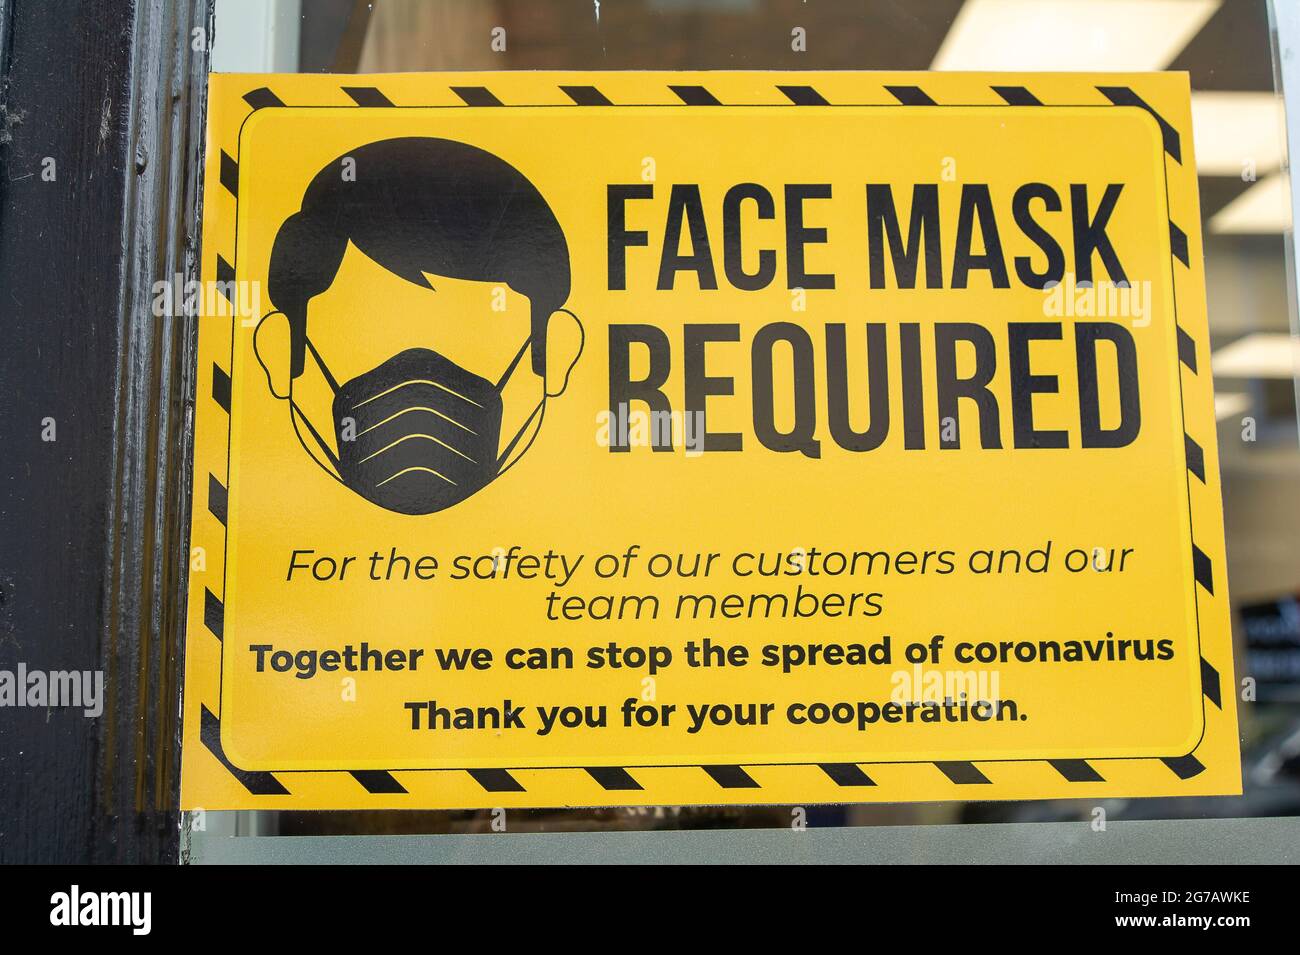 Wokingham, Berkshire, UK. 12th July, 2021. A bright Face Mask Required sign in a shop window. Wokingham has recorded another 61 positive Covid-19 cases in the past 24 hours. Boris Johnson has today announced the lifting of the Covid-19 lockdown from 19th July 2021, despite the number of positive cases spiralling out of control. Credit: Maureen McLean/Alamy Stock Photo